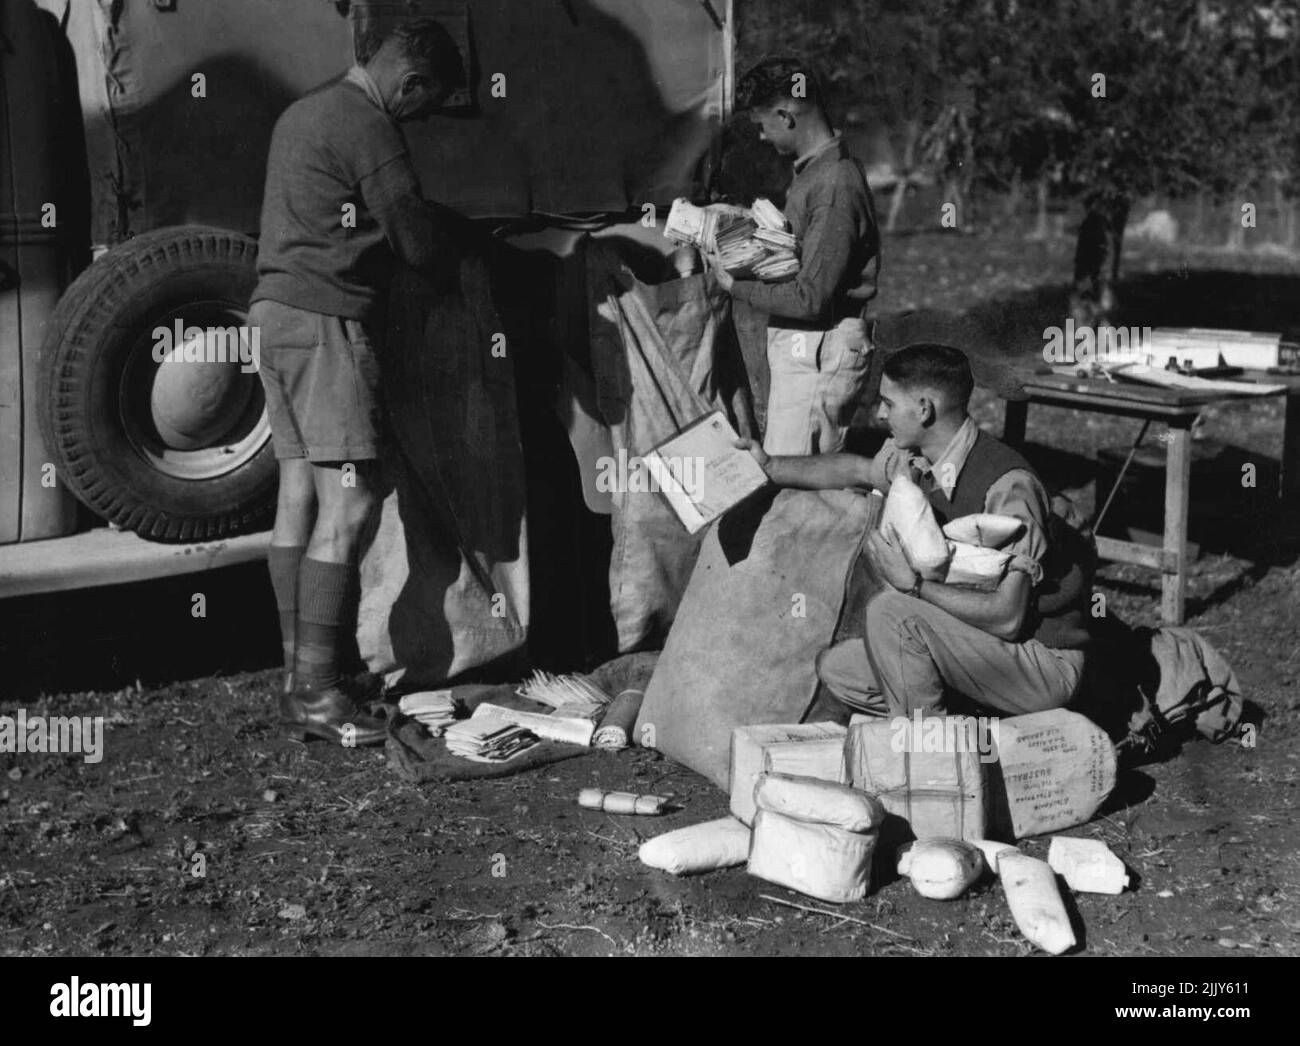 Postal-Letters-Parcels Etc. - Australian Military. May 18, 1942. (Photo by A.I.F Photograph). Stock Photo